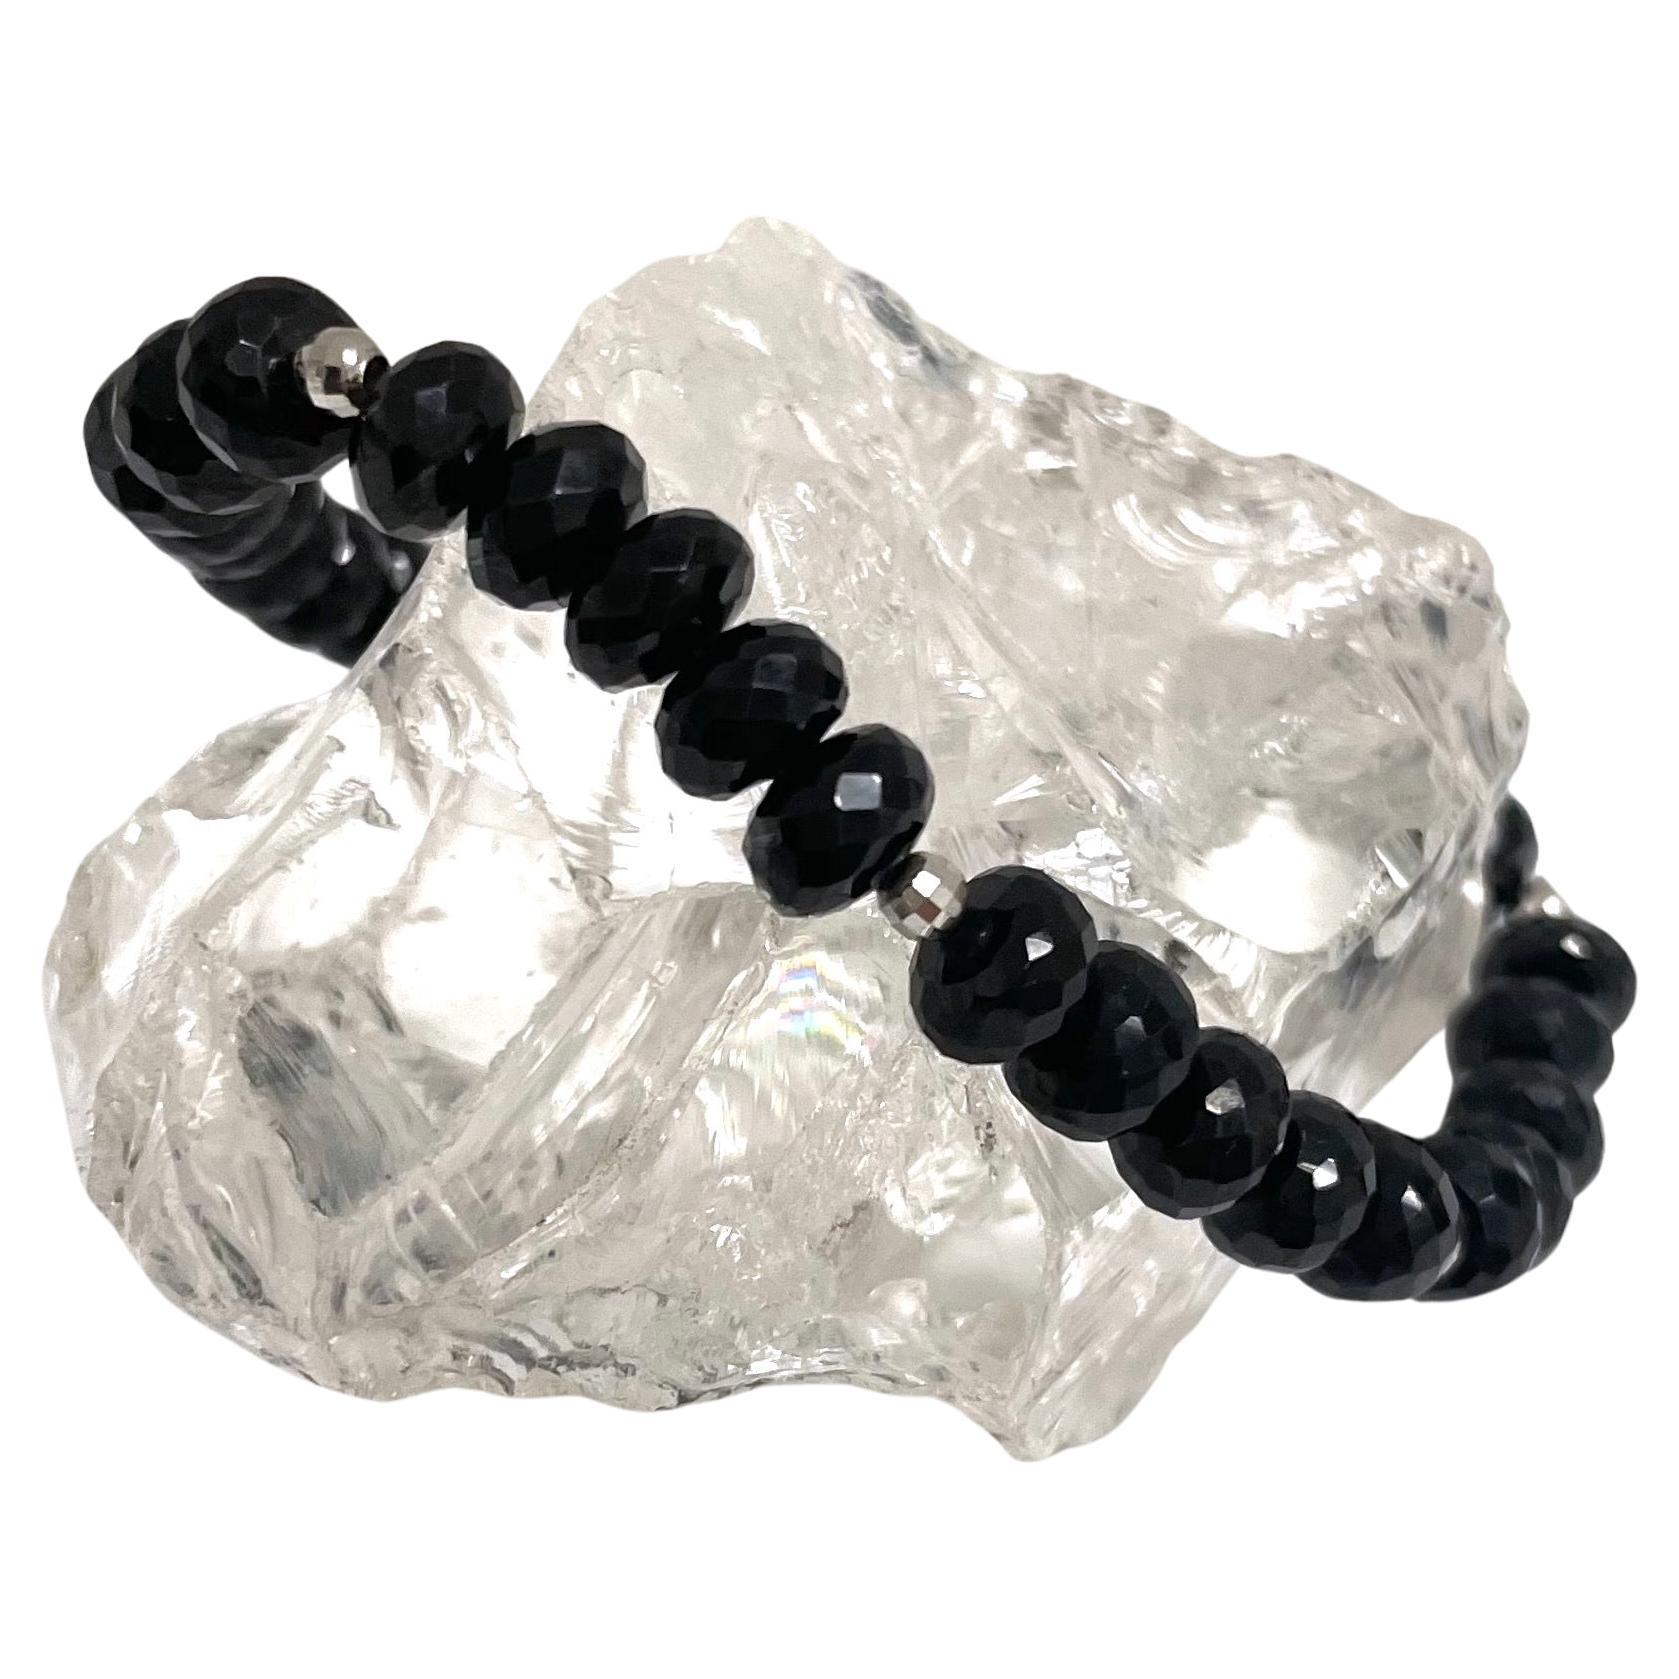 Description
Beautiful, casual or dressy, sparkling black spinel stretchy bracelet accented with 14k white gold faceted balls.
Item # B1320 
Stack it with Item # B1321, sold separately.

Materials and Weight 
Black spinel 81cts.7mm, faceted rondelle